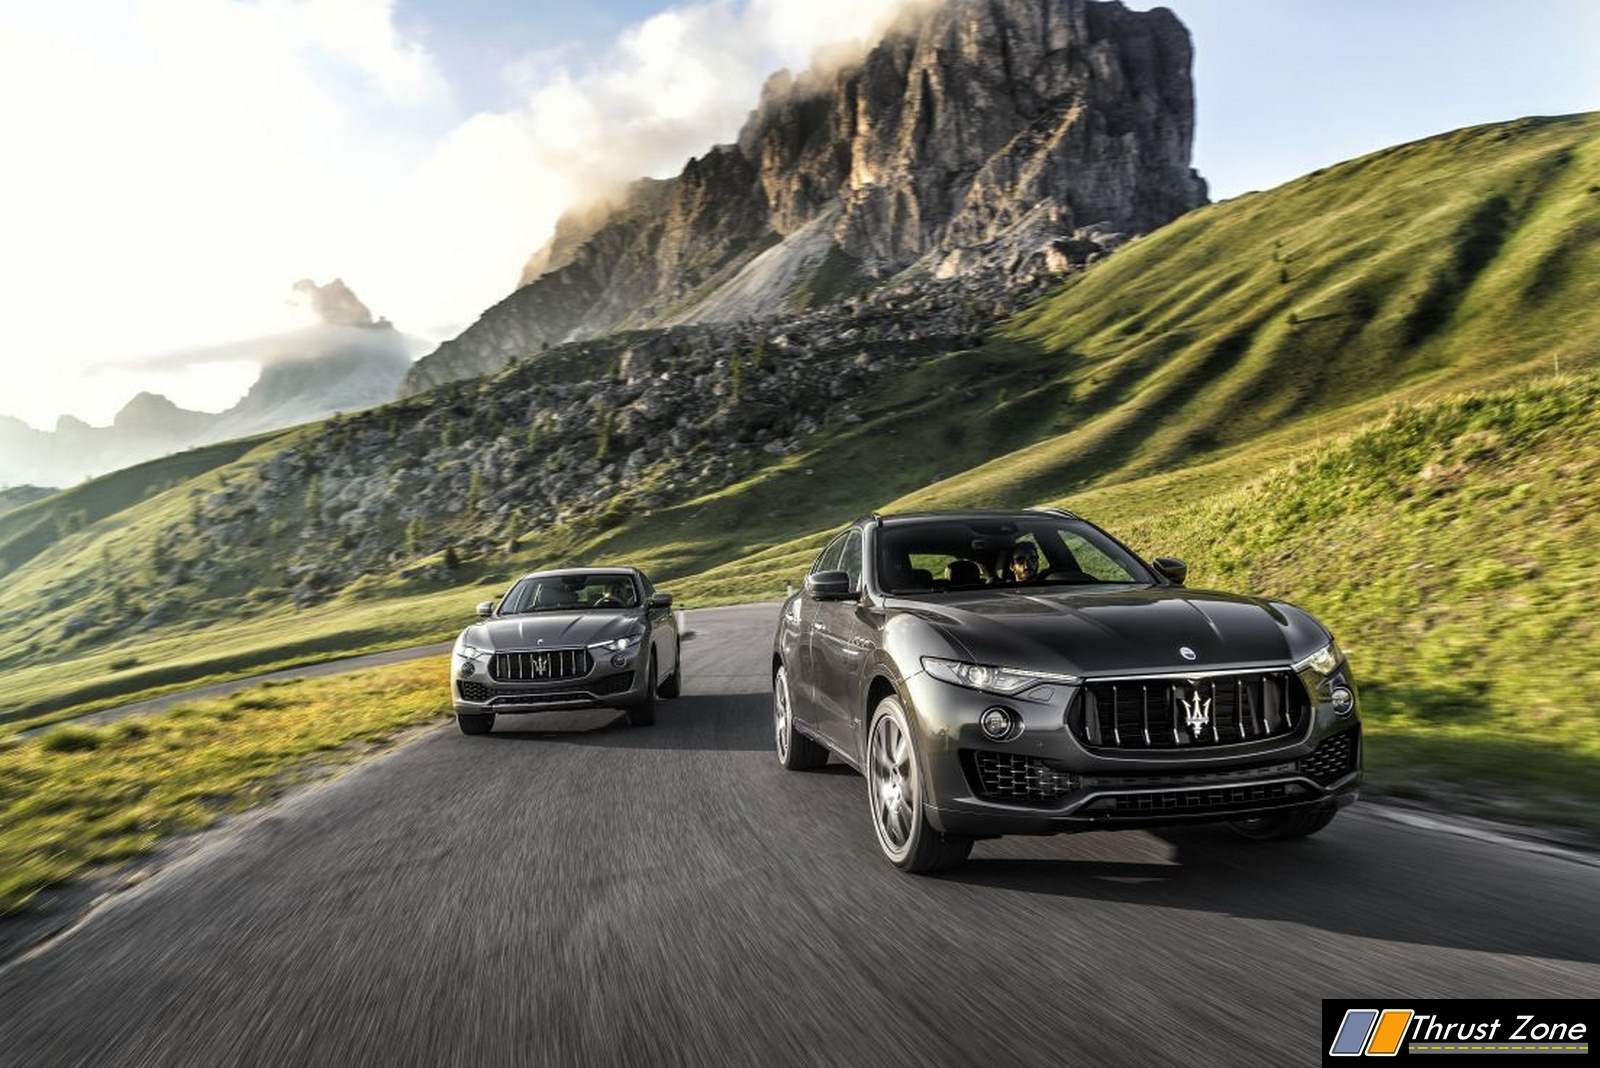 Maserati Levante India Details Here Launched With Diesel